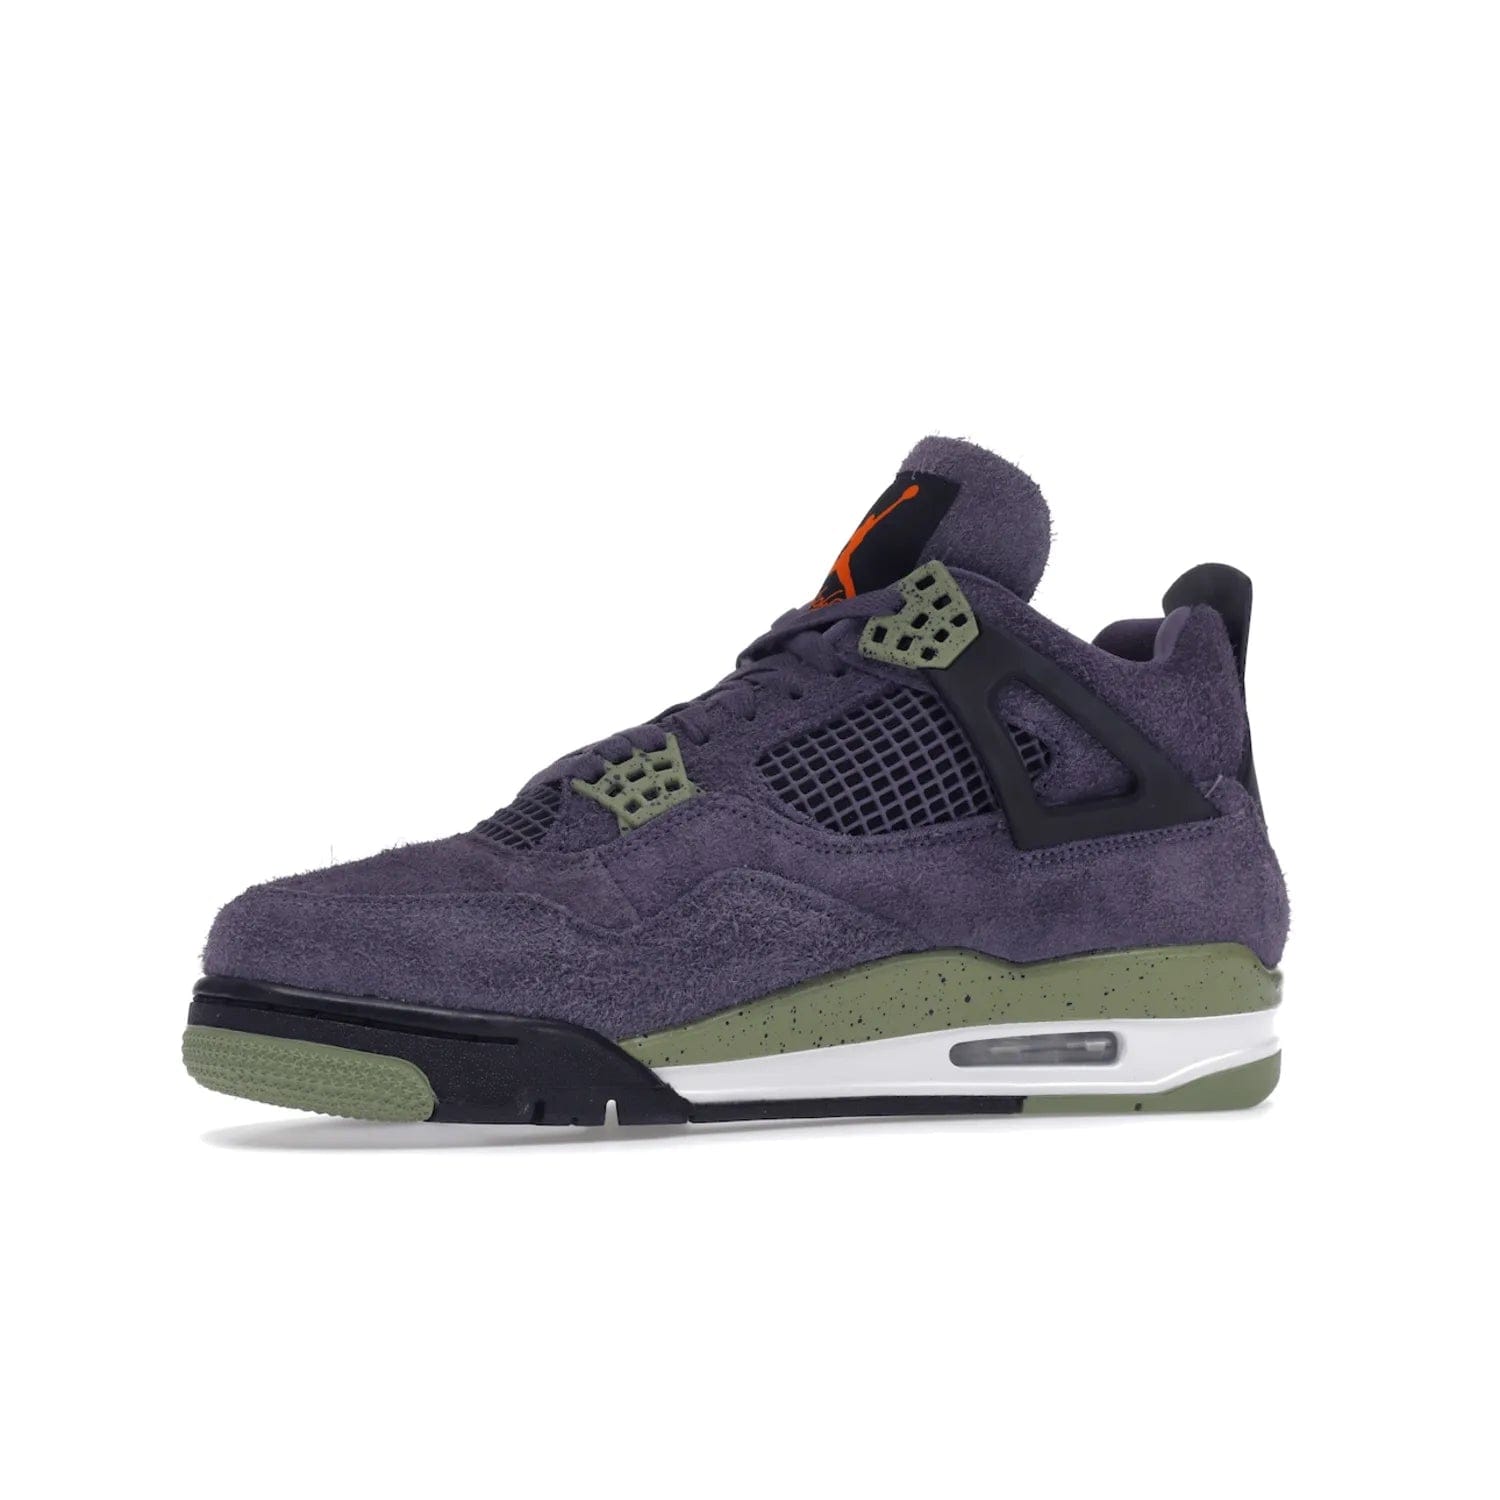 Jordan 4 Retro Canyon Purple (Women's) - Image 17 - Only at www.BallersClubKickz.com - New Air Jordan 4 Retro Canyon Purple W sneaker features shaggy purple suede, lime highlights & safety orange Jumpman branding. Classic ankle-hugging silhouette with modern colors released 15/10/2022.